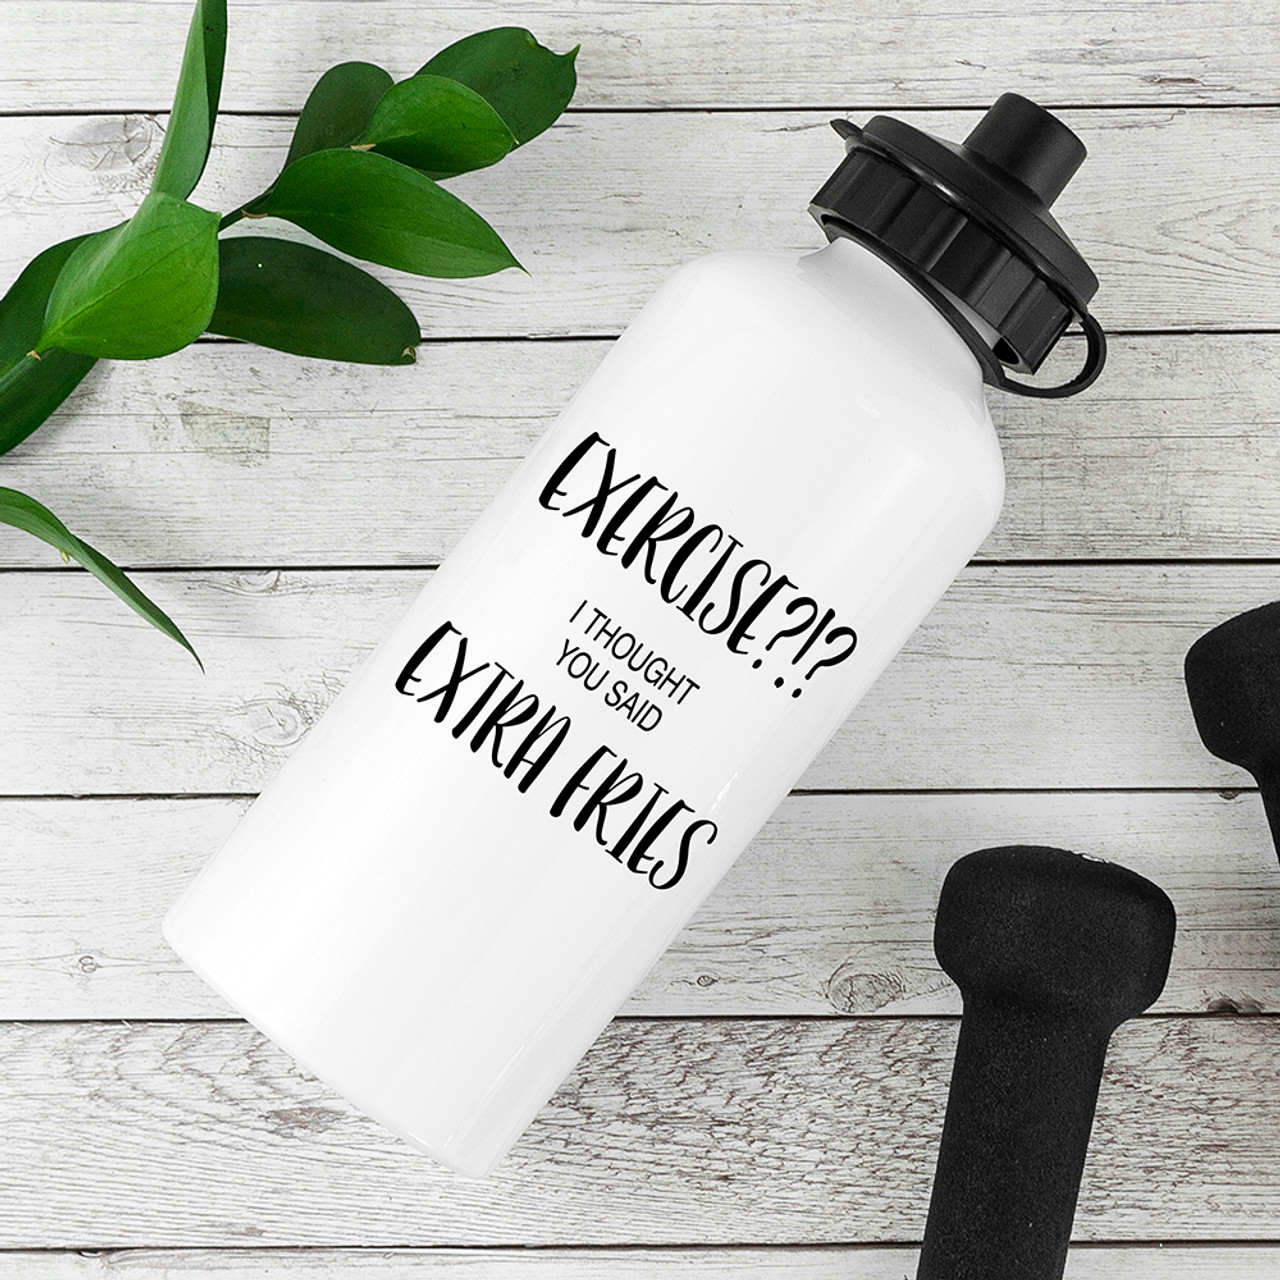 https://cdn11.bigcommerce.com/s-mk8mgl5/images/stencil/1280x1280/products/1073/7425/White_Metal_Water_Bottle_2__19700.1573557329.jpg?c=2